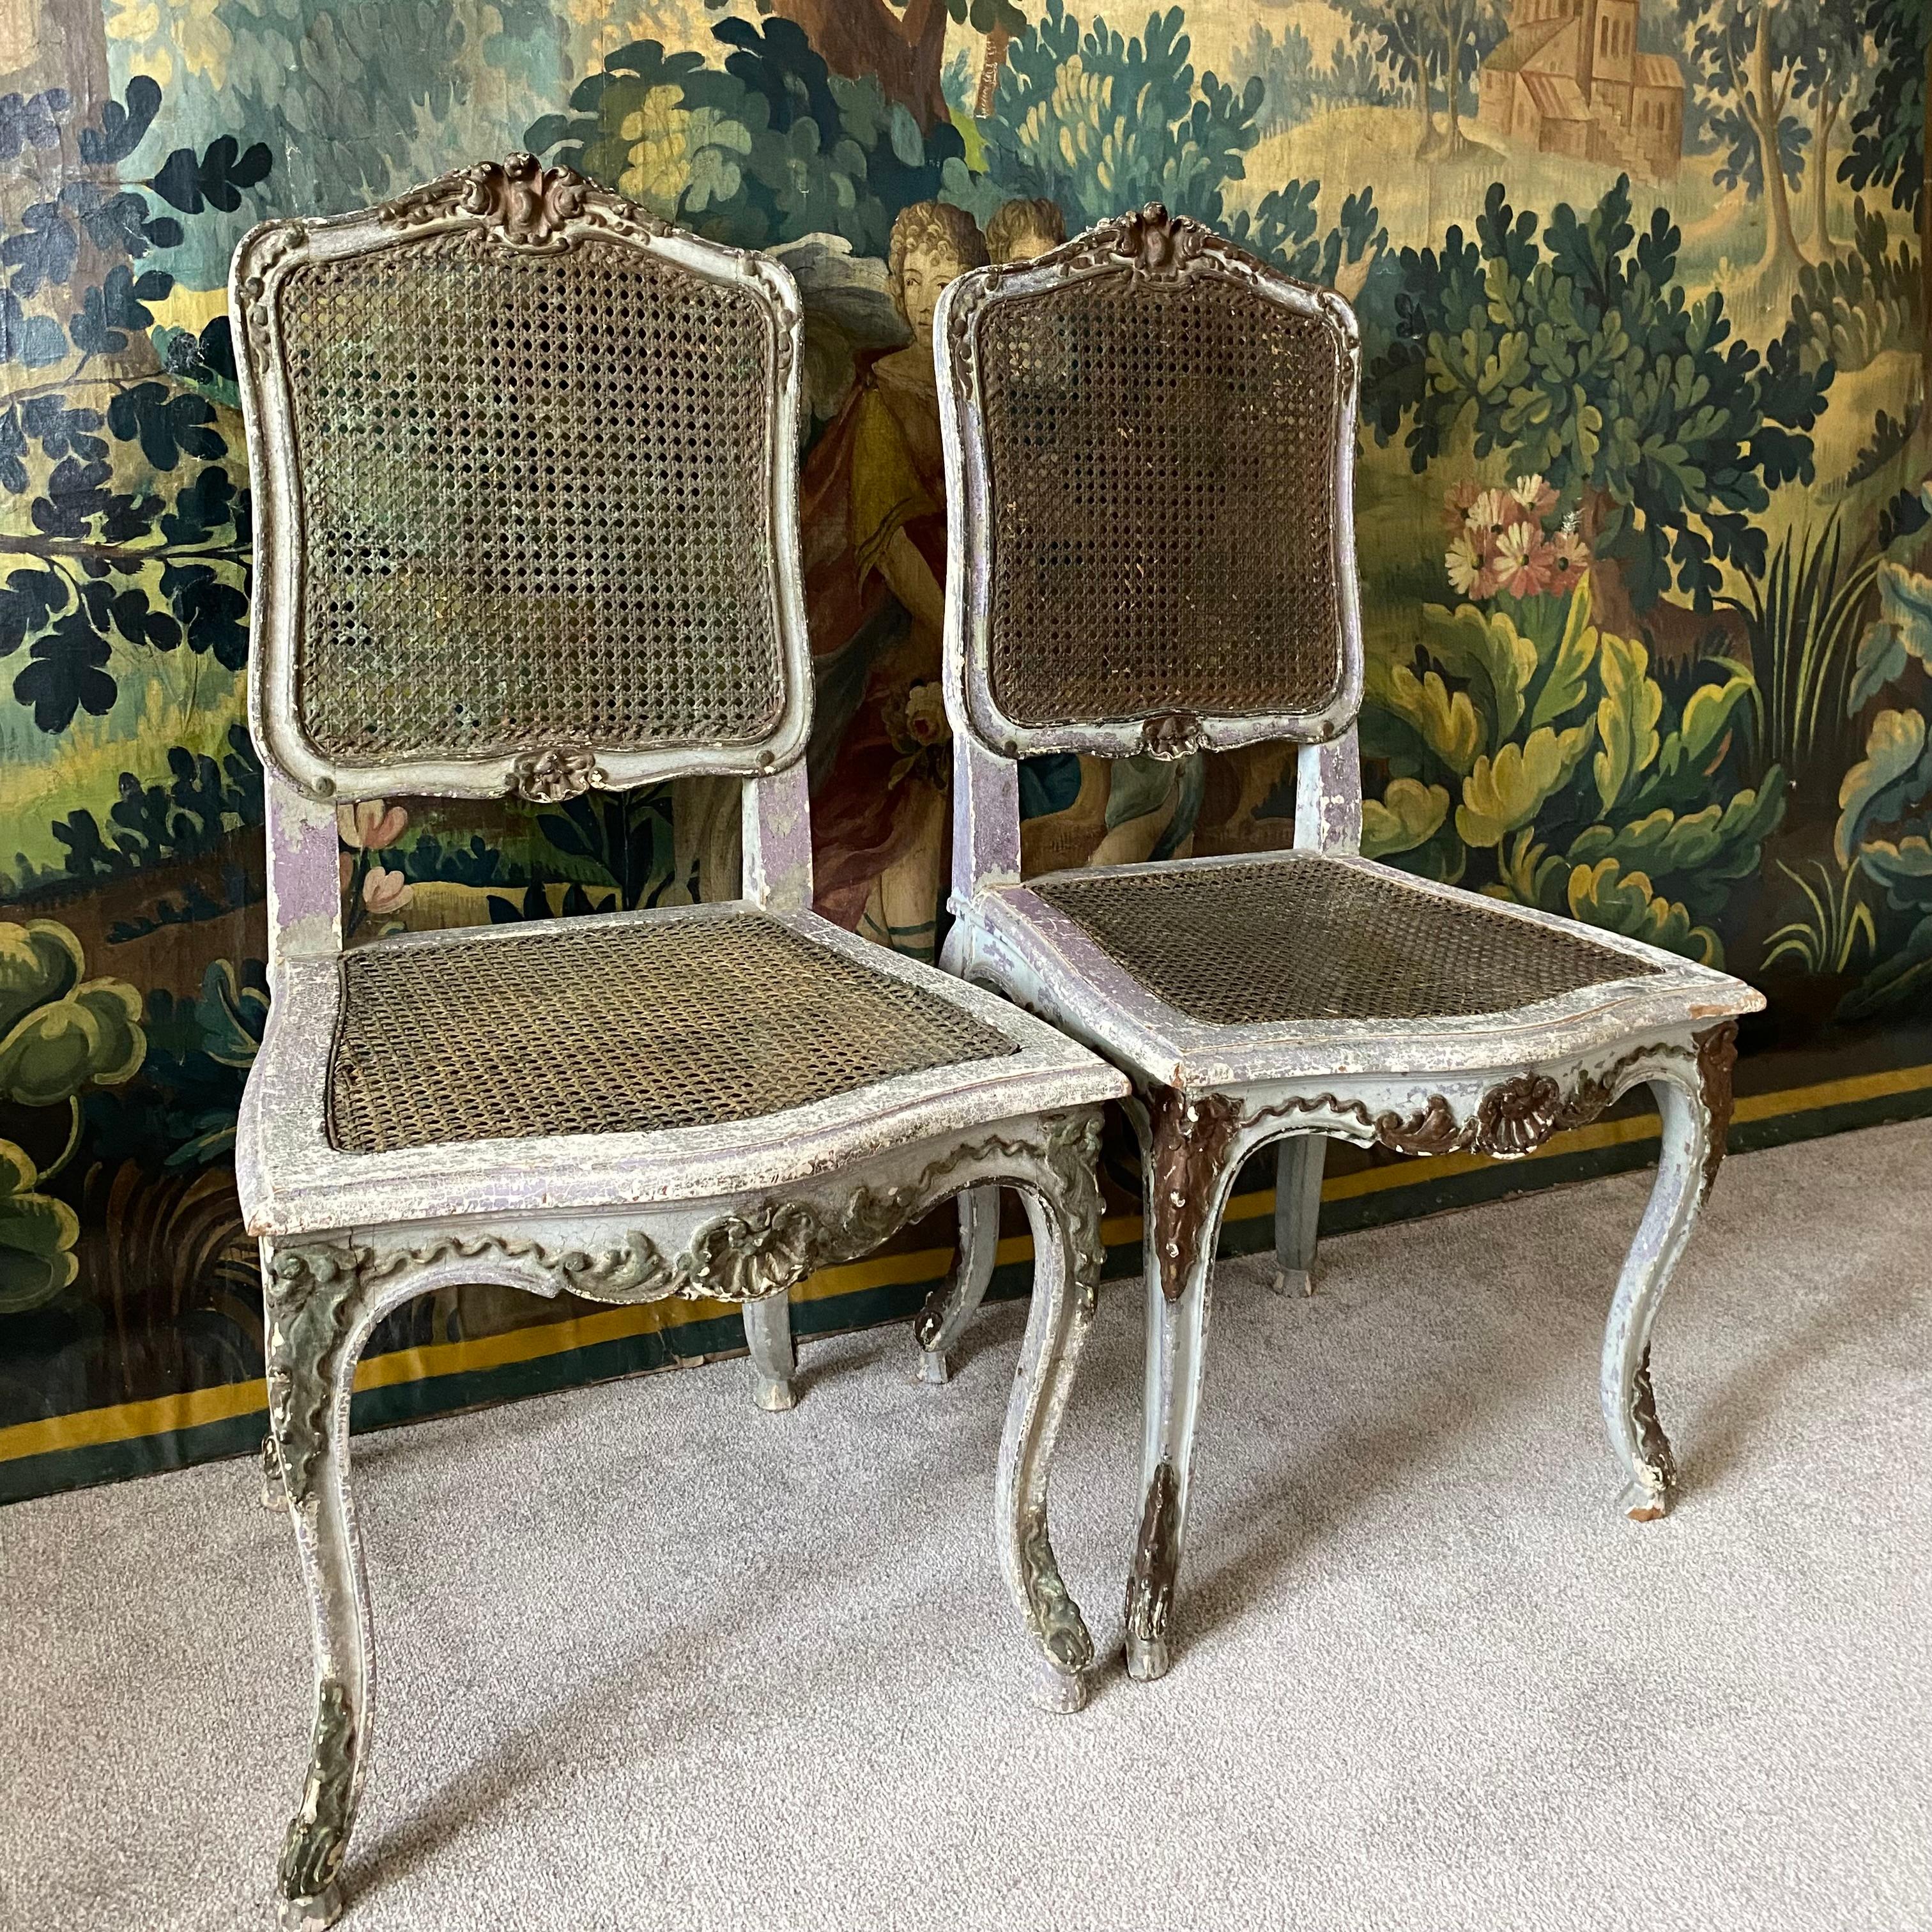 A pair of late 19th century French side chairs with seats and backs with their original cane - this is in good condition with no wear or damage but please note these are decorative side or bedroom chairs and are not for suitable for heavy use - with